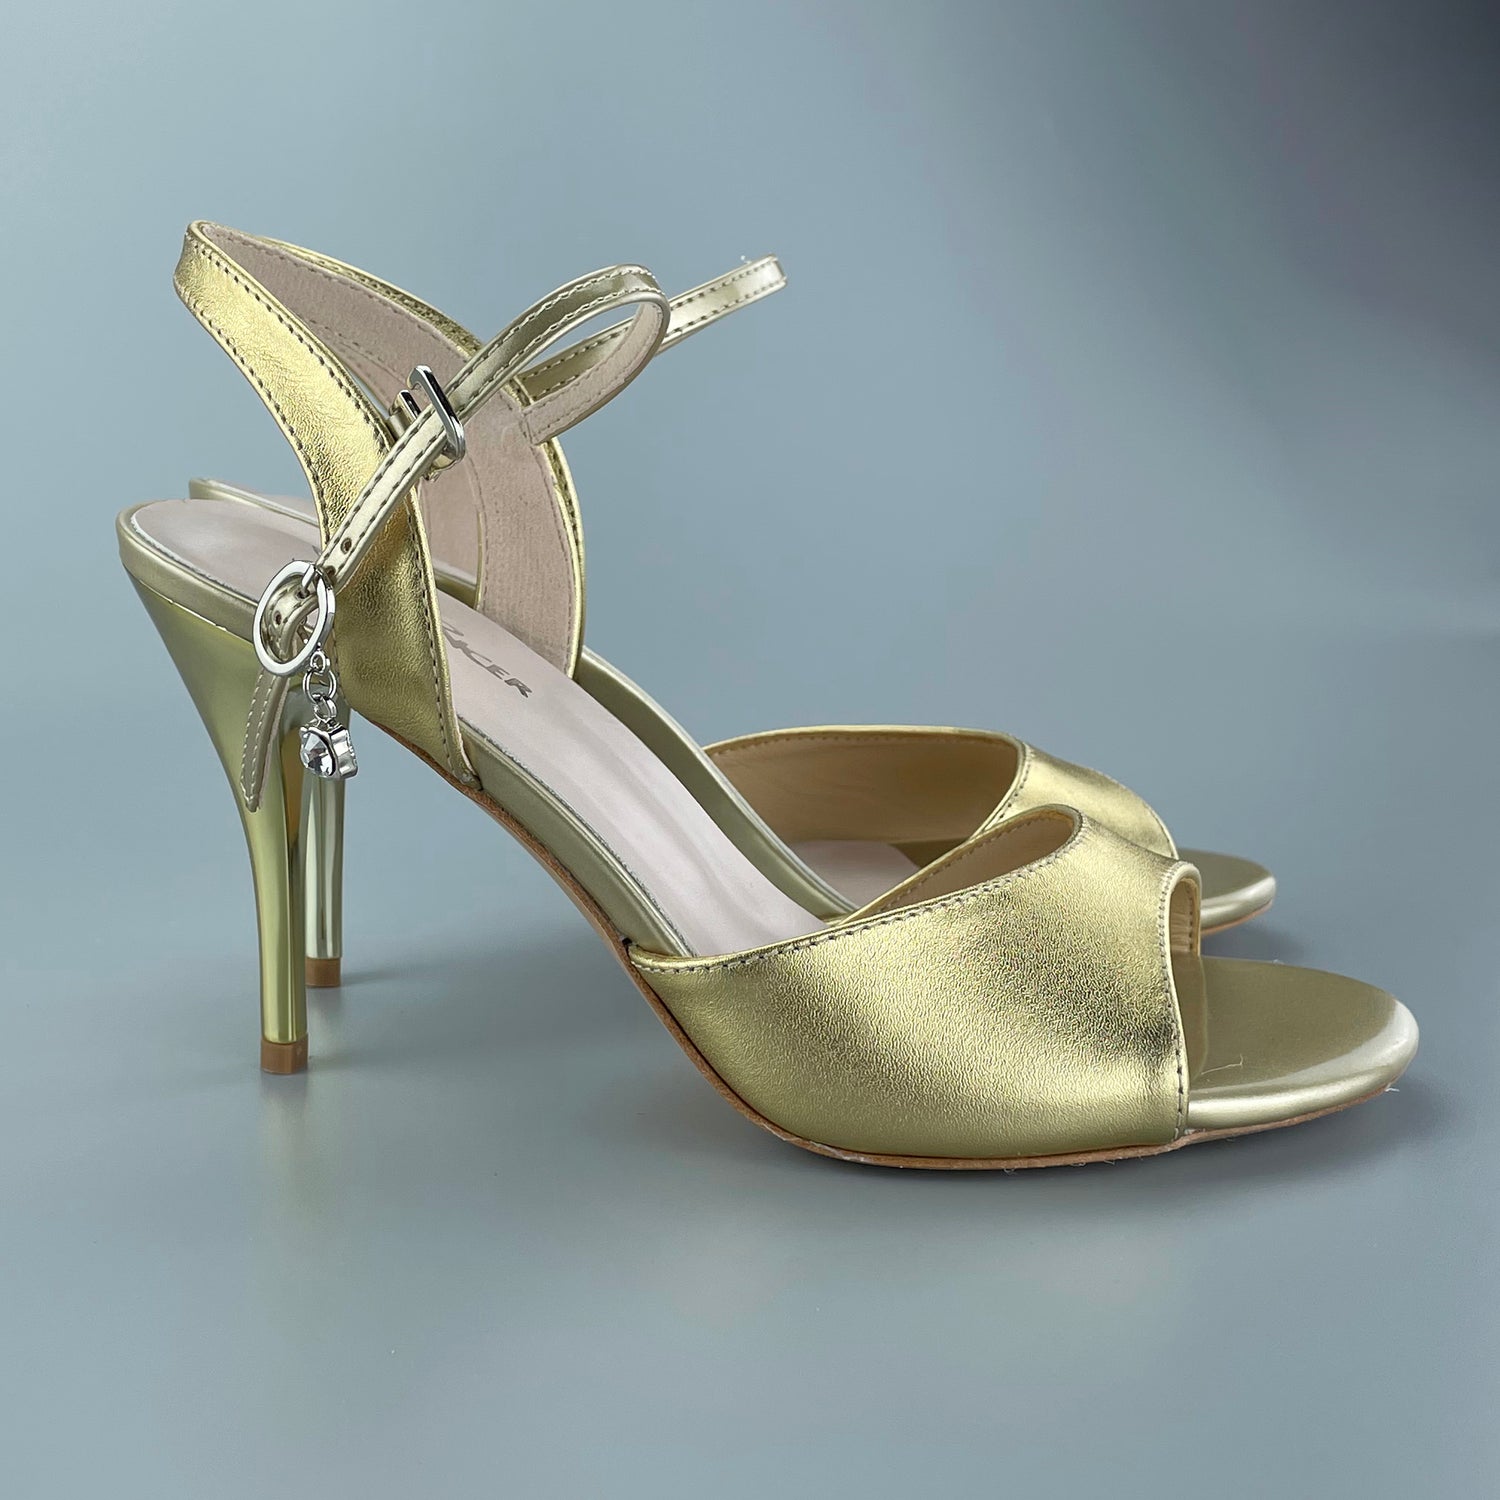 Gold Pro Dancer Tango Shoes open-toe high heels with hard leather sole4